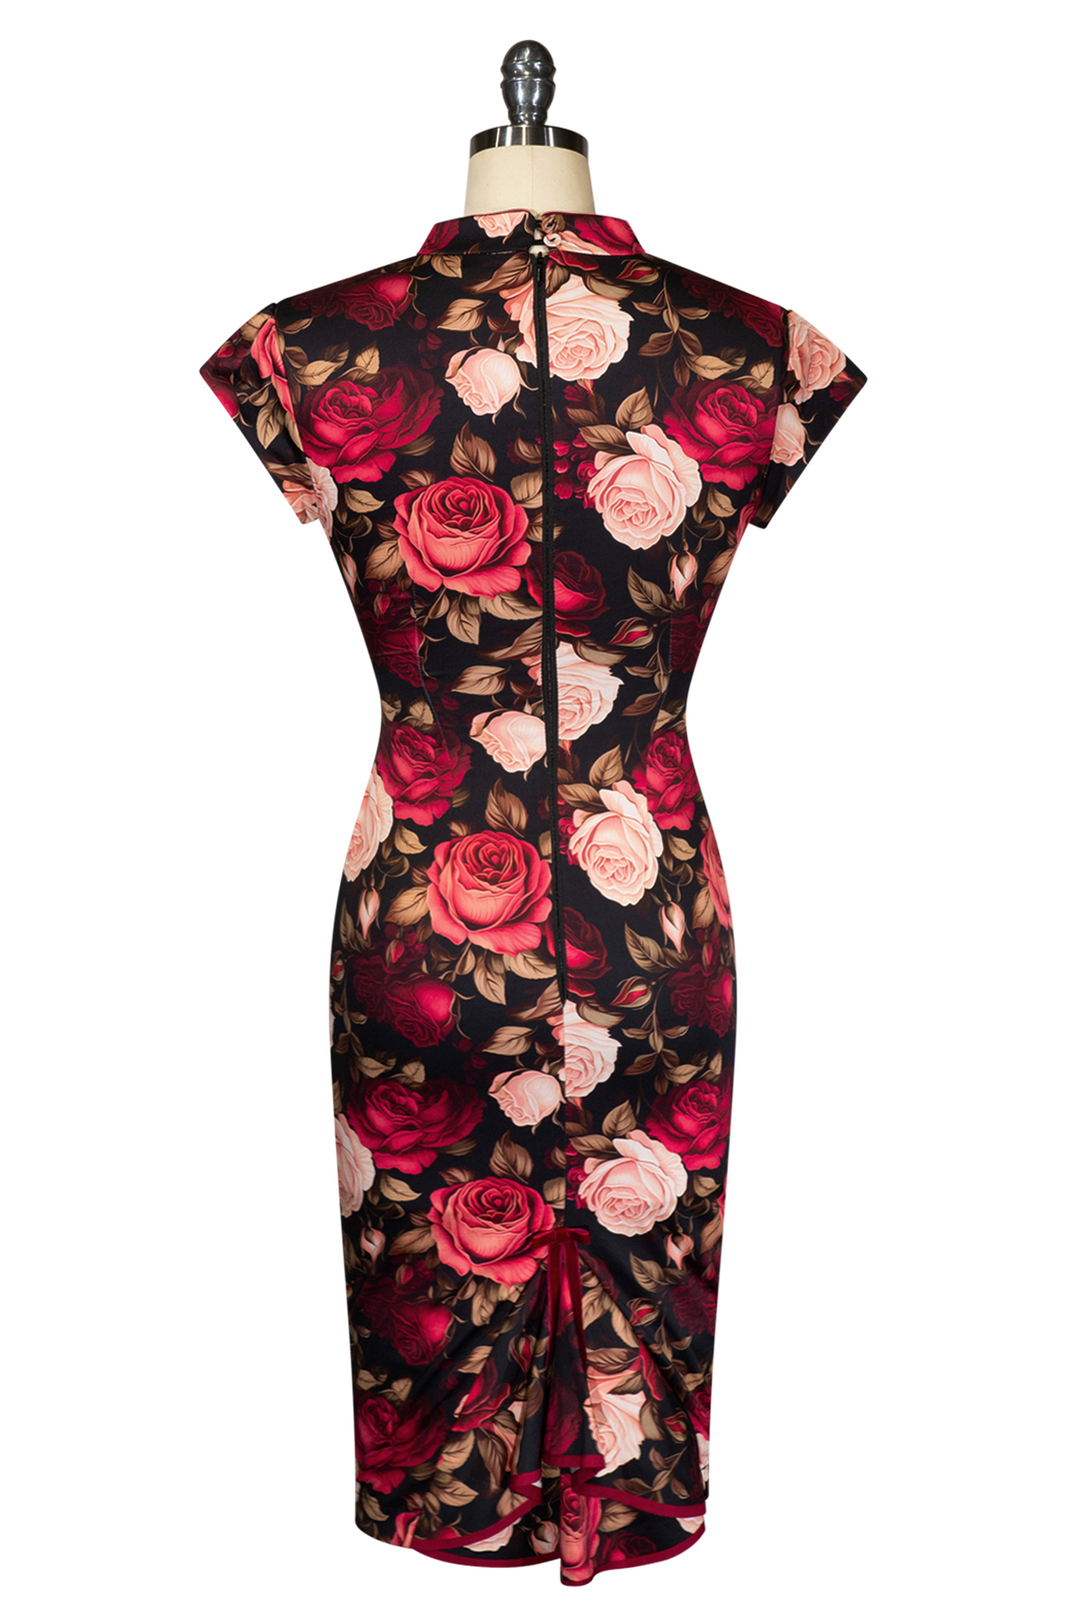 Capone Floral Wiggle Dress - Kitten D'Amour